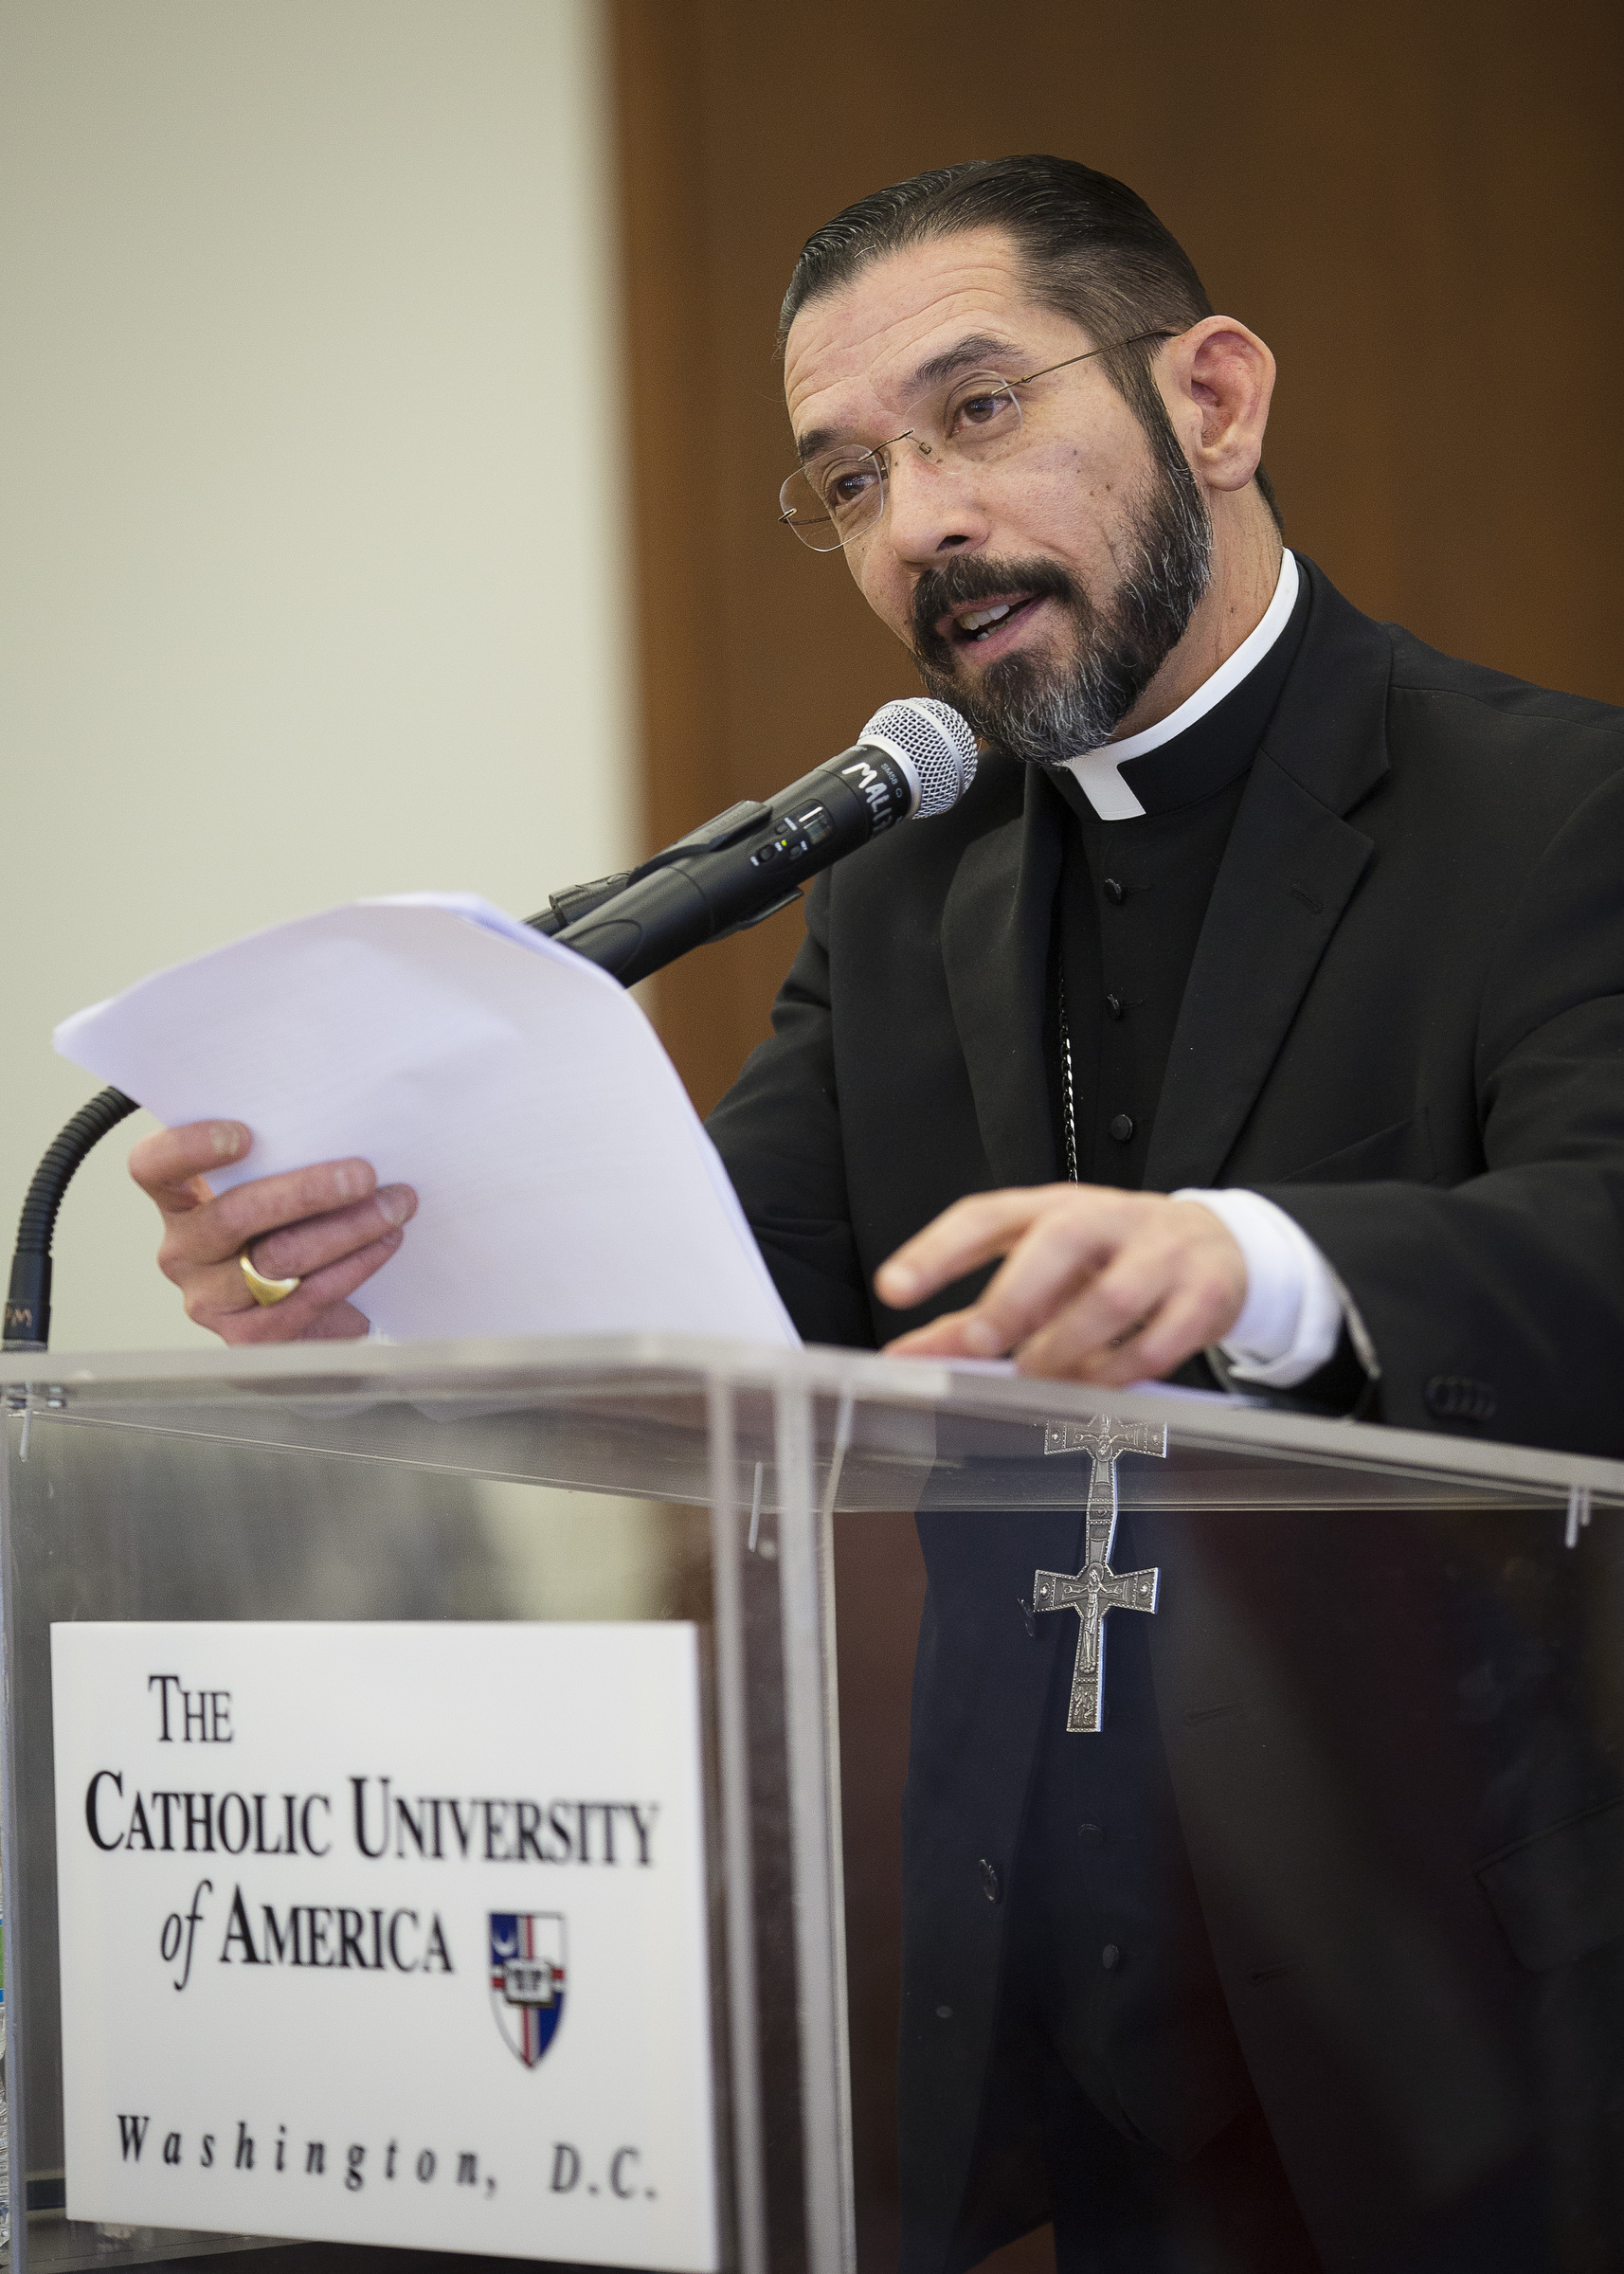 Bishop Daniel Flores of Brownsville, Texas, delivers a lecture on immigration Feb. 24 on the campus of The Catholic University of America in Washington, urging the country to breakout of social "paralysis" on the issue and approach it with faith. (CNS/Tyler Orsburn) 